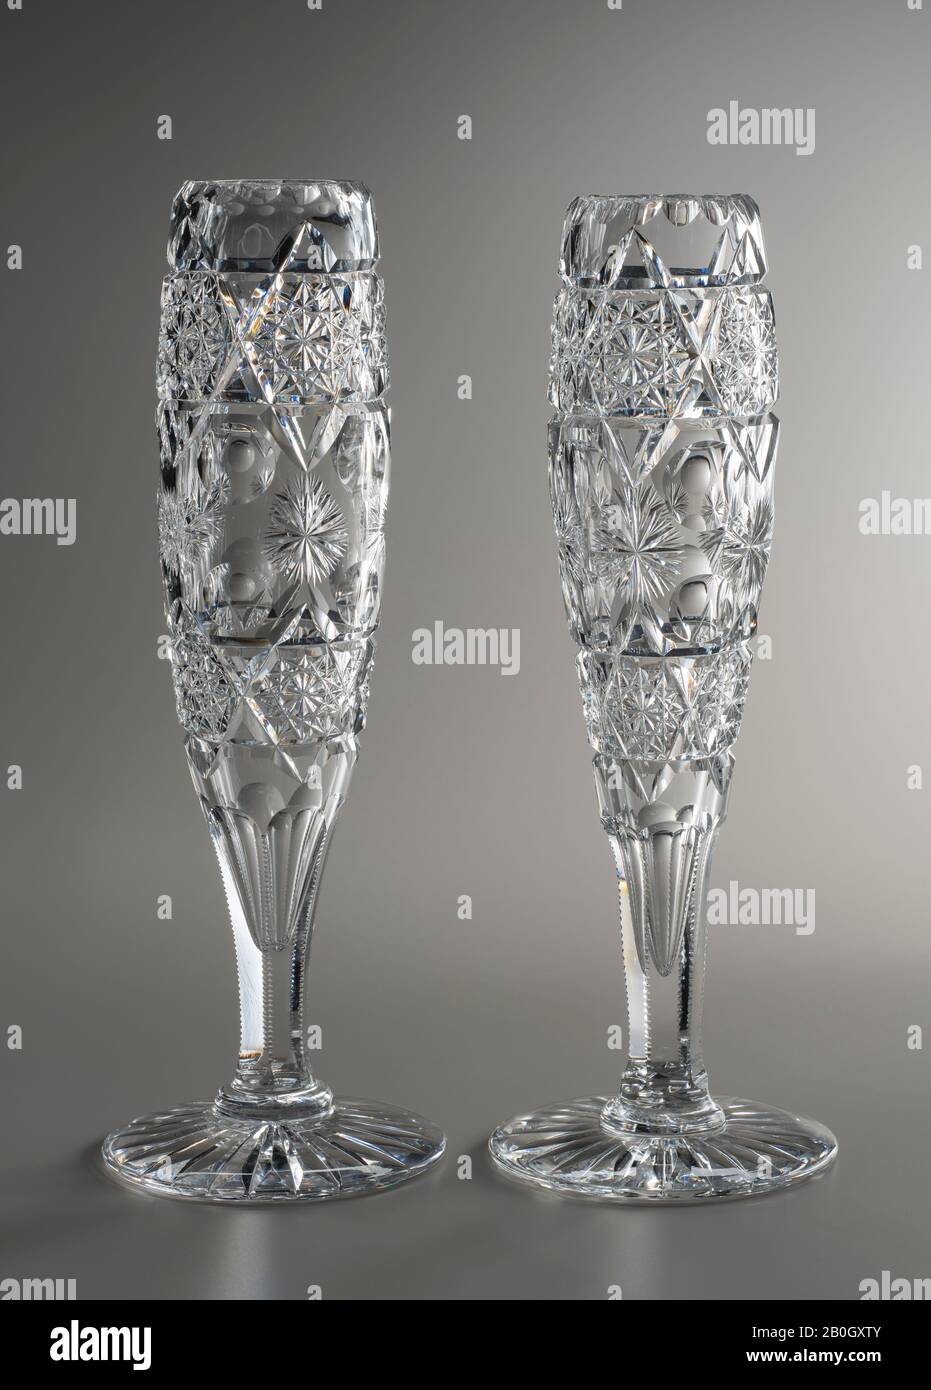 Maker unknown, Pair of Vases, c. 1907, Colorless lead glass Stock Photo